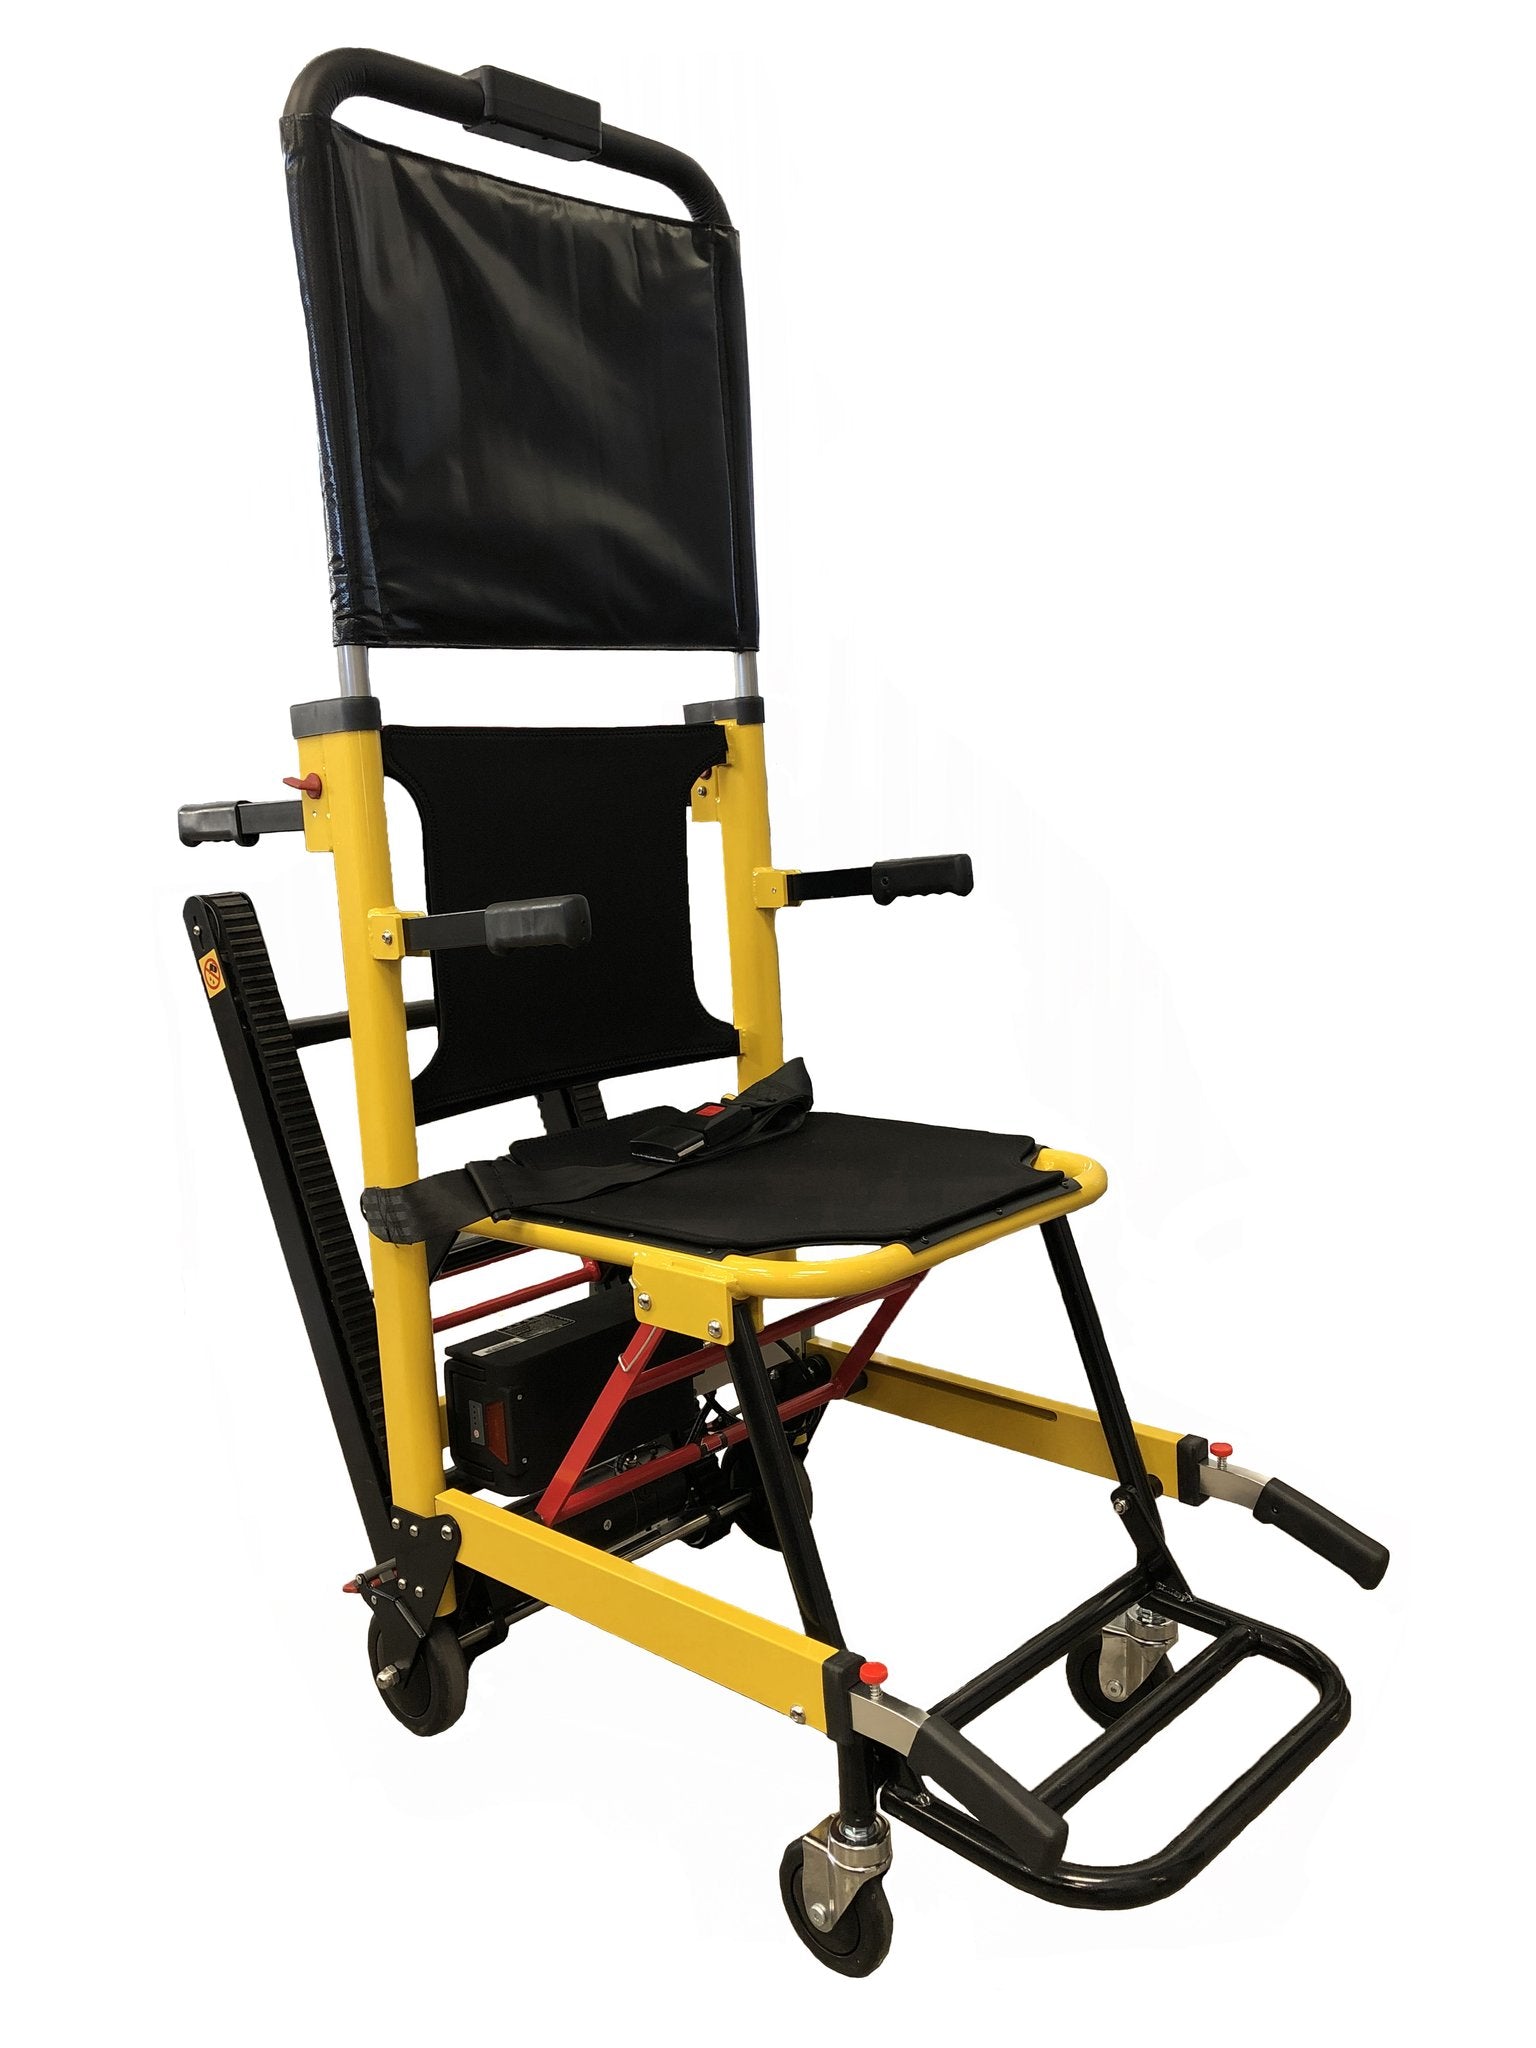 Genesis Mobile Stairlift - Battery Powered Portable Stair Wheelchair - Motorized Chair Lift, Yellow